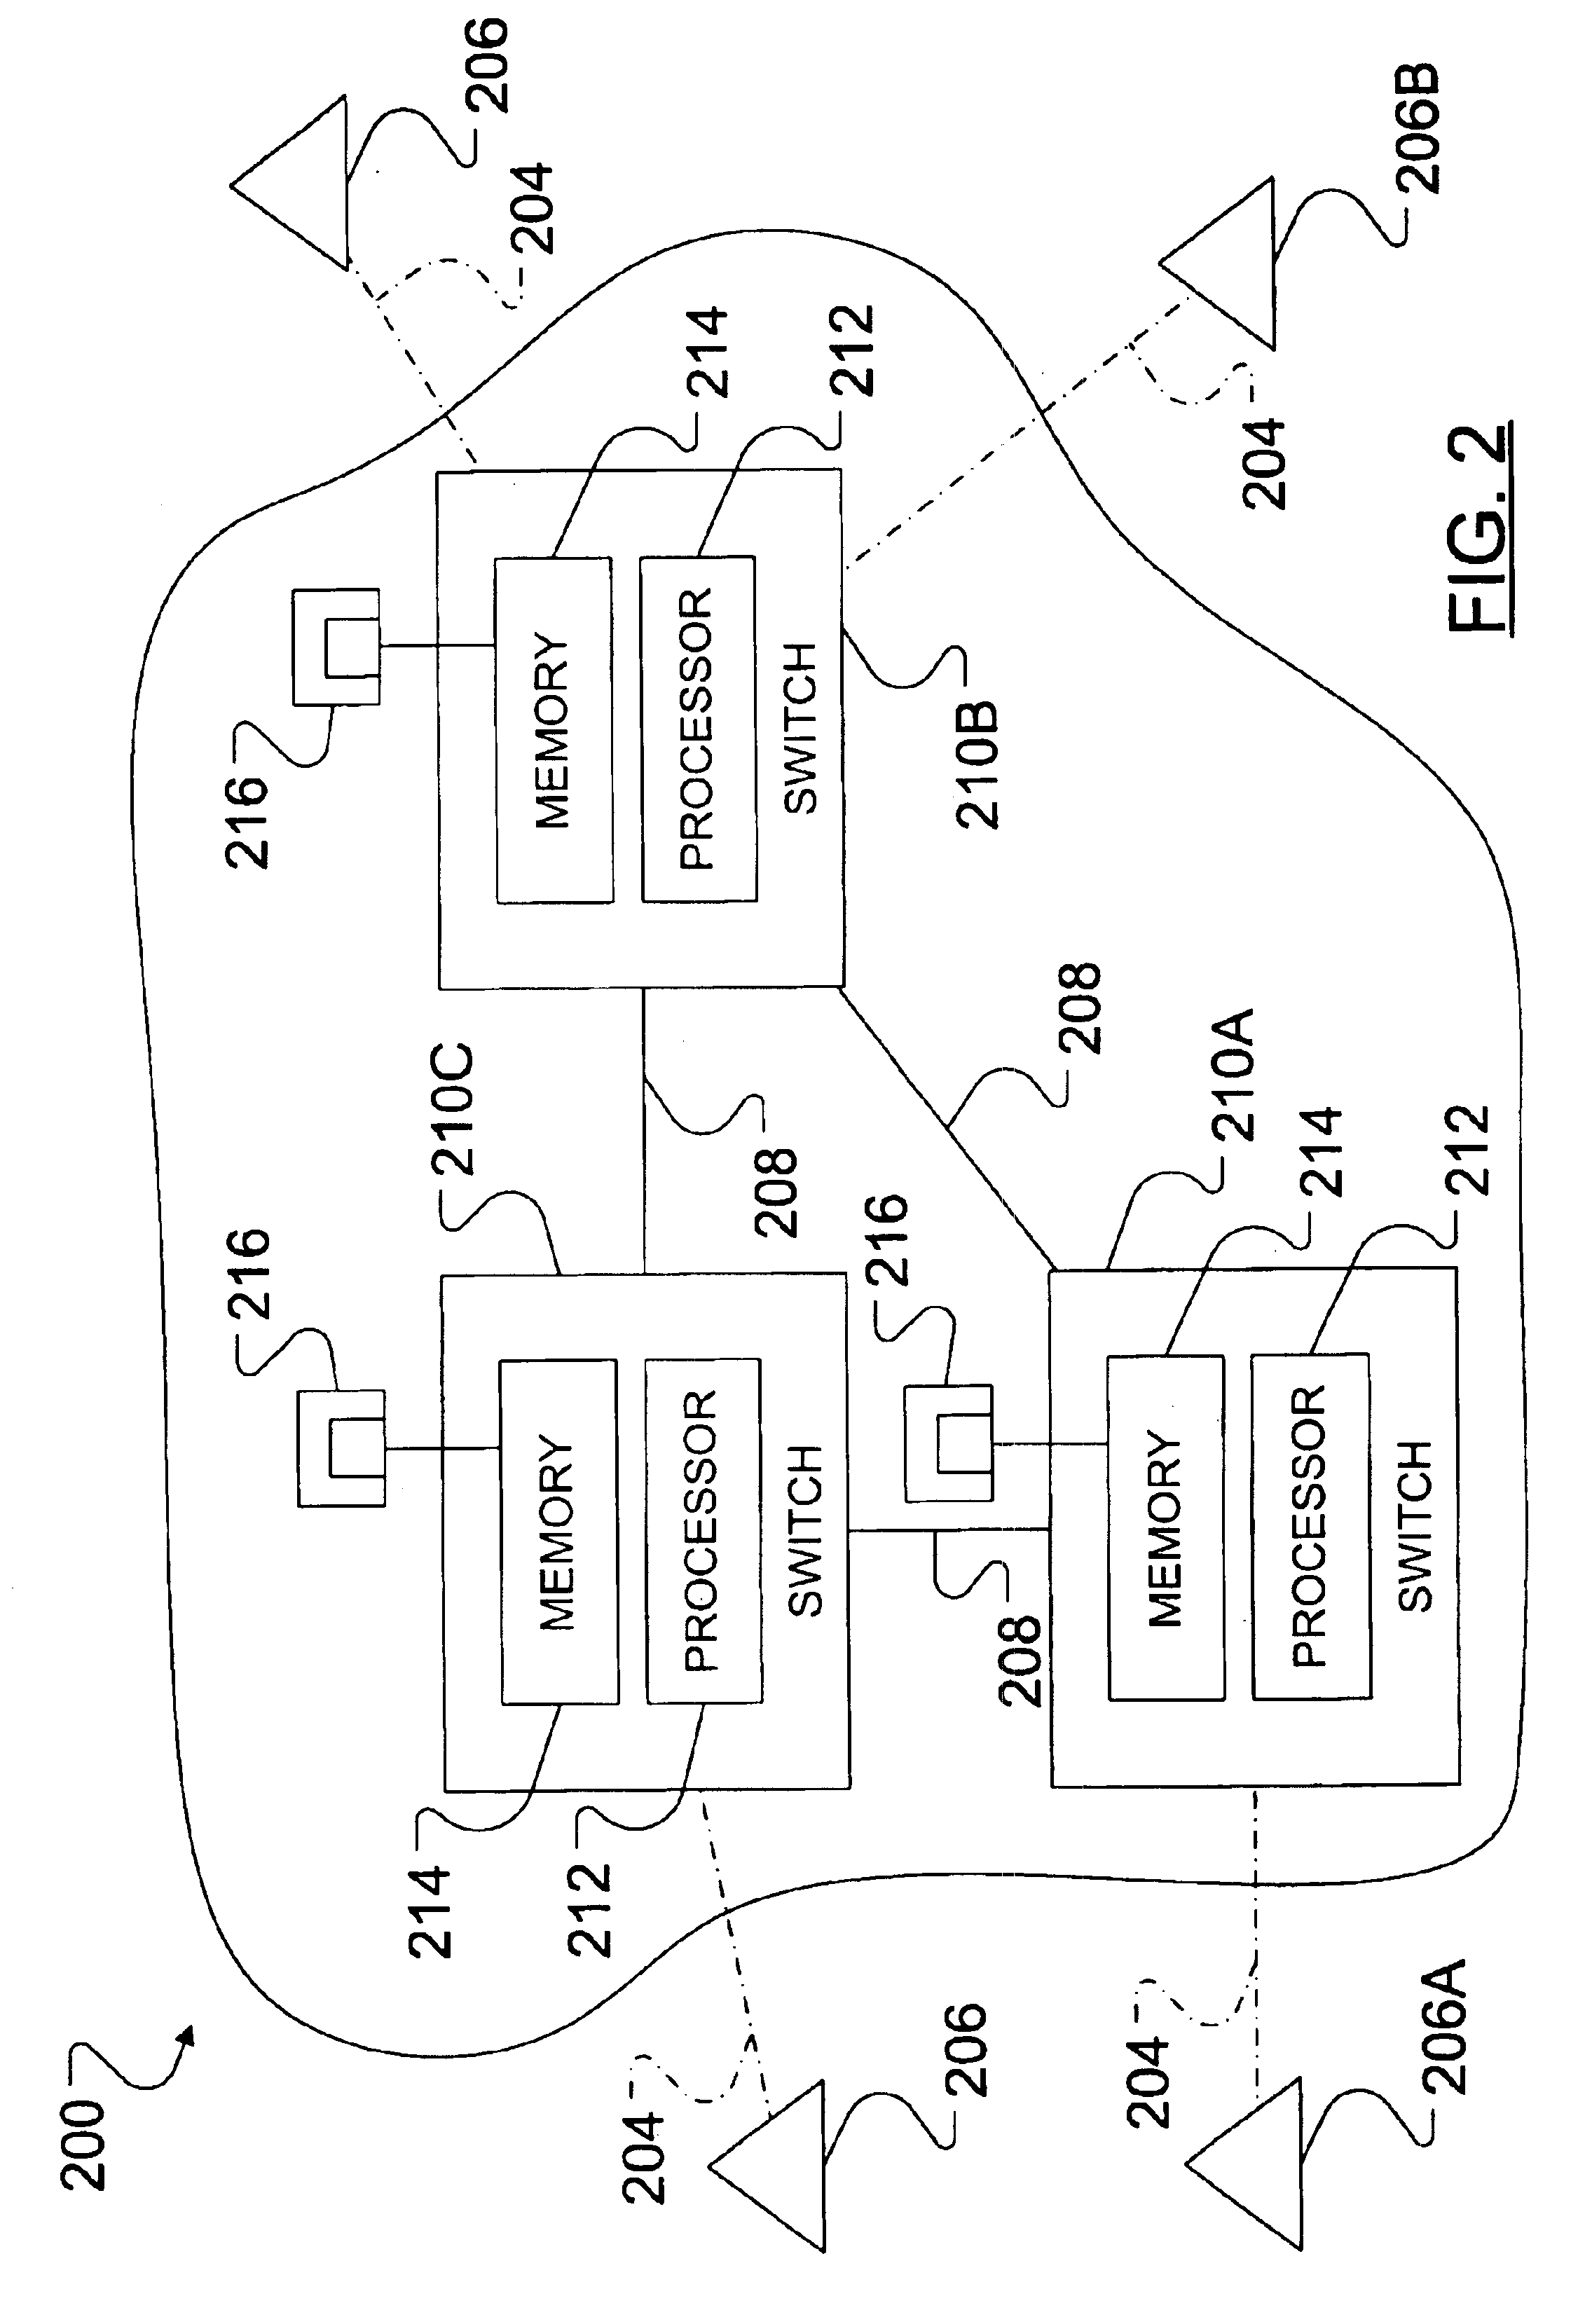 State information and routing table updates in large scale data networks